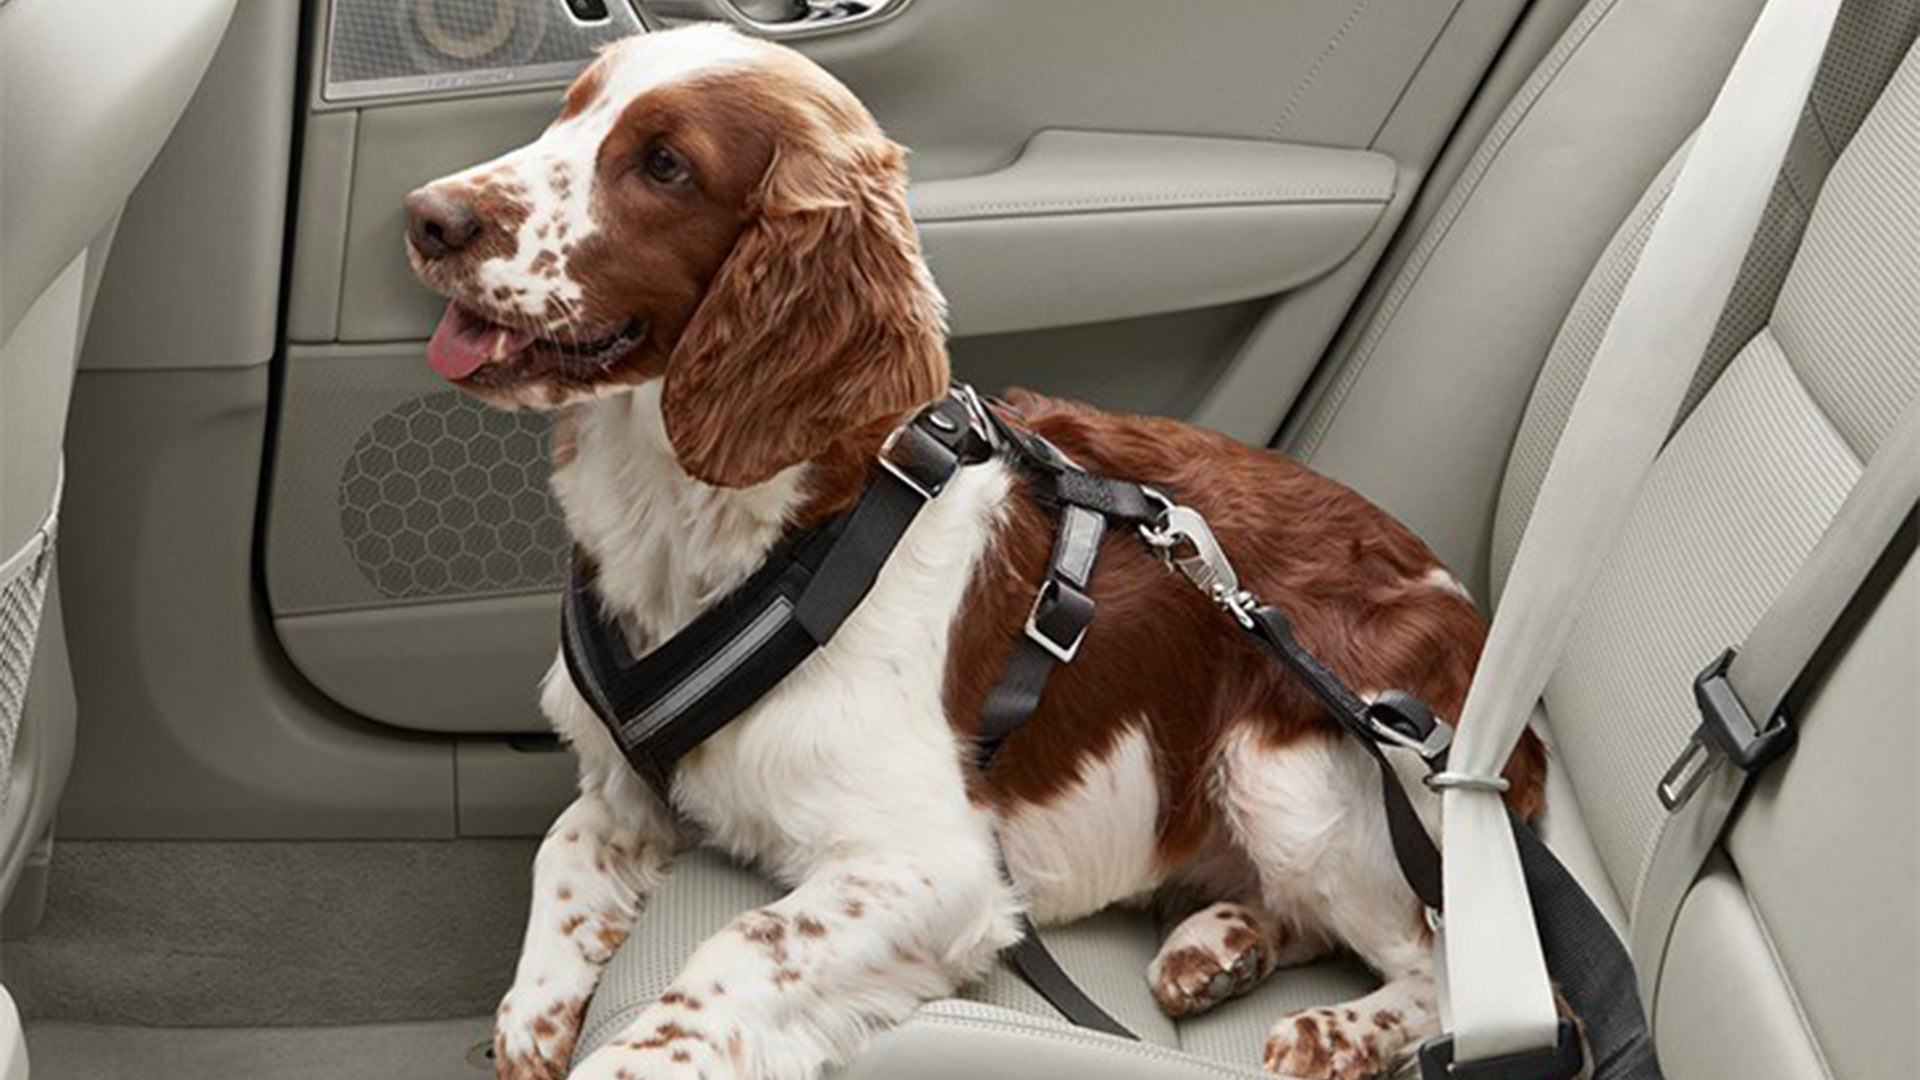 Danger of unrestrained pets in cars